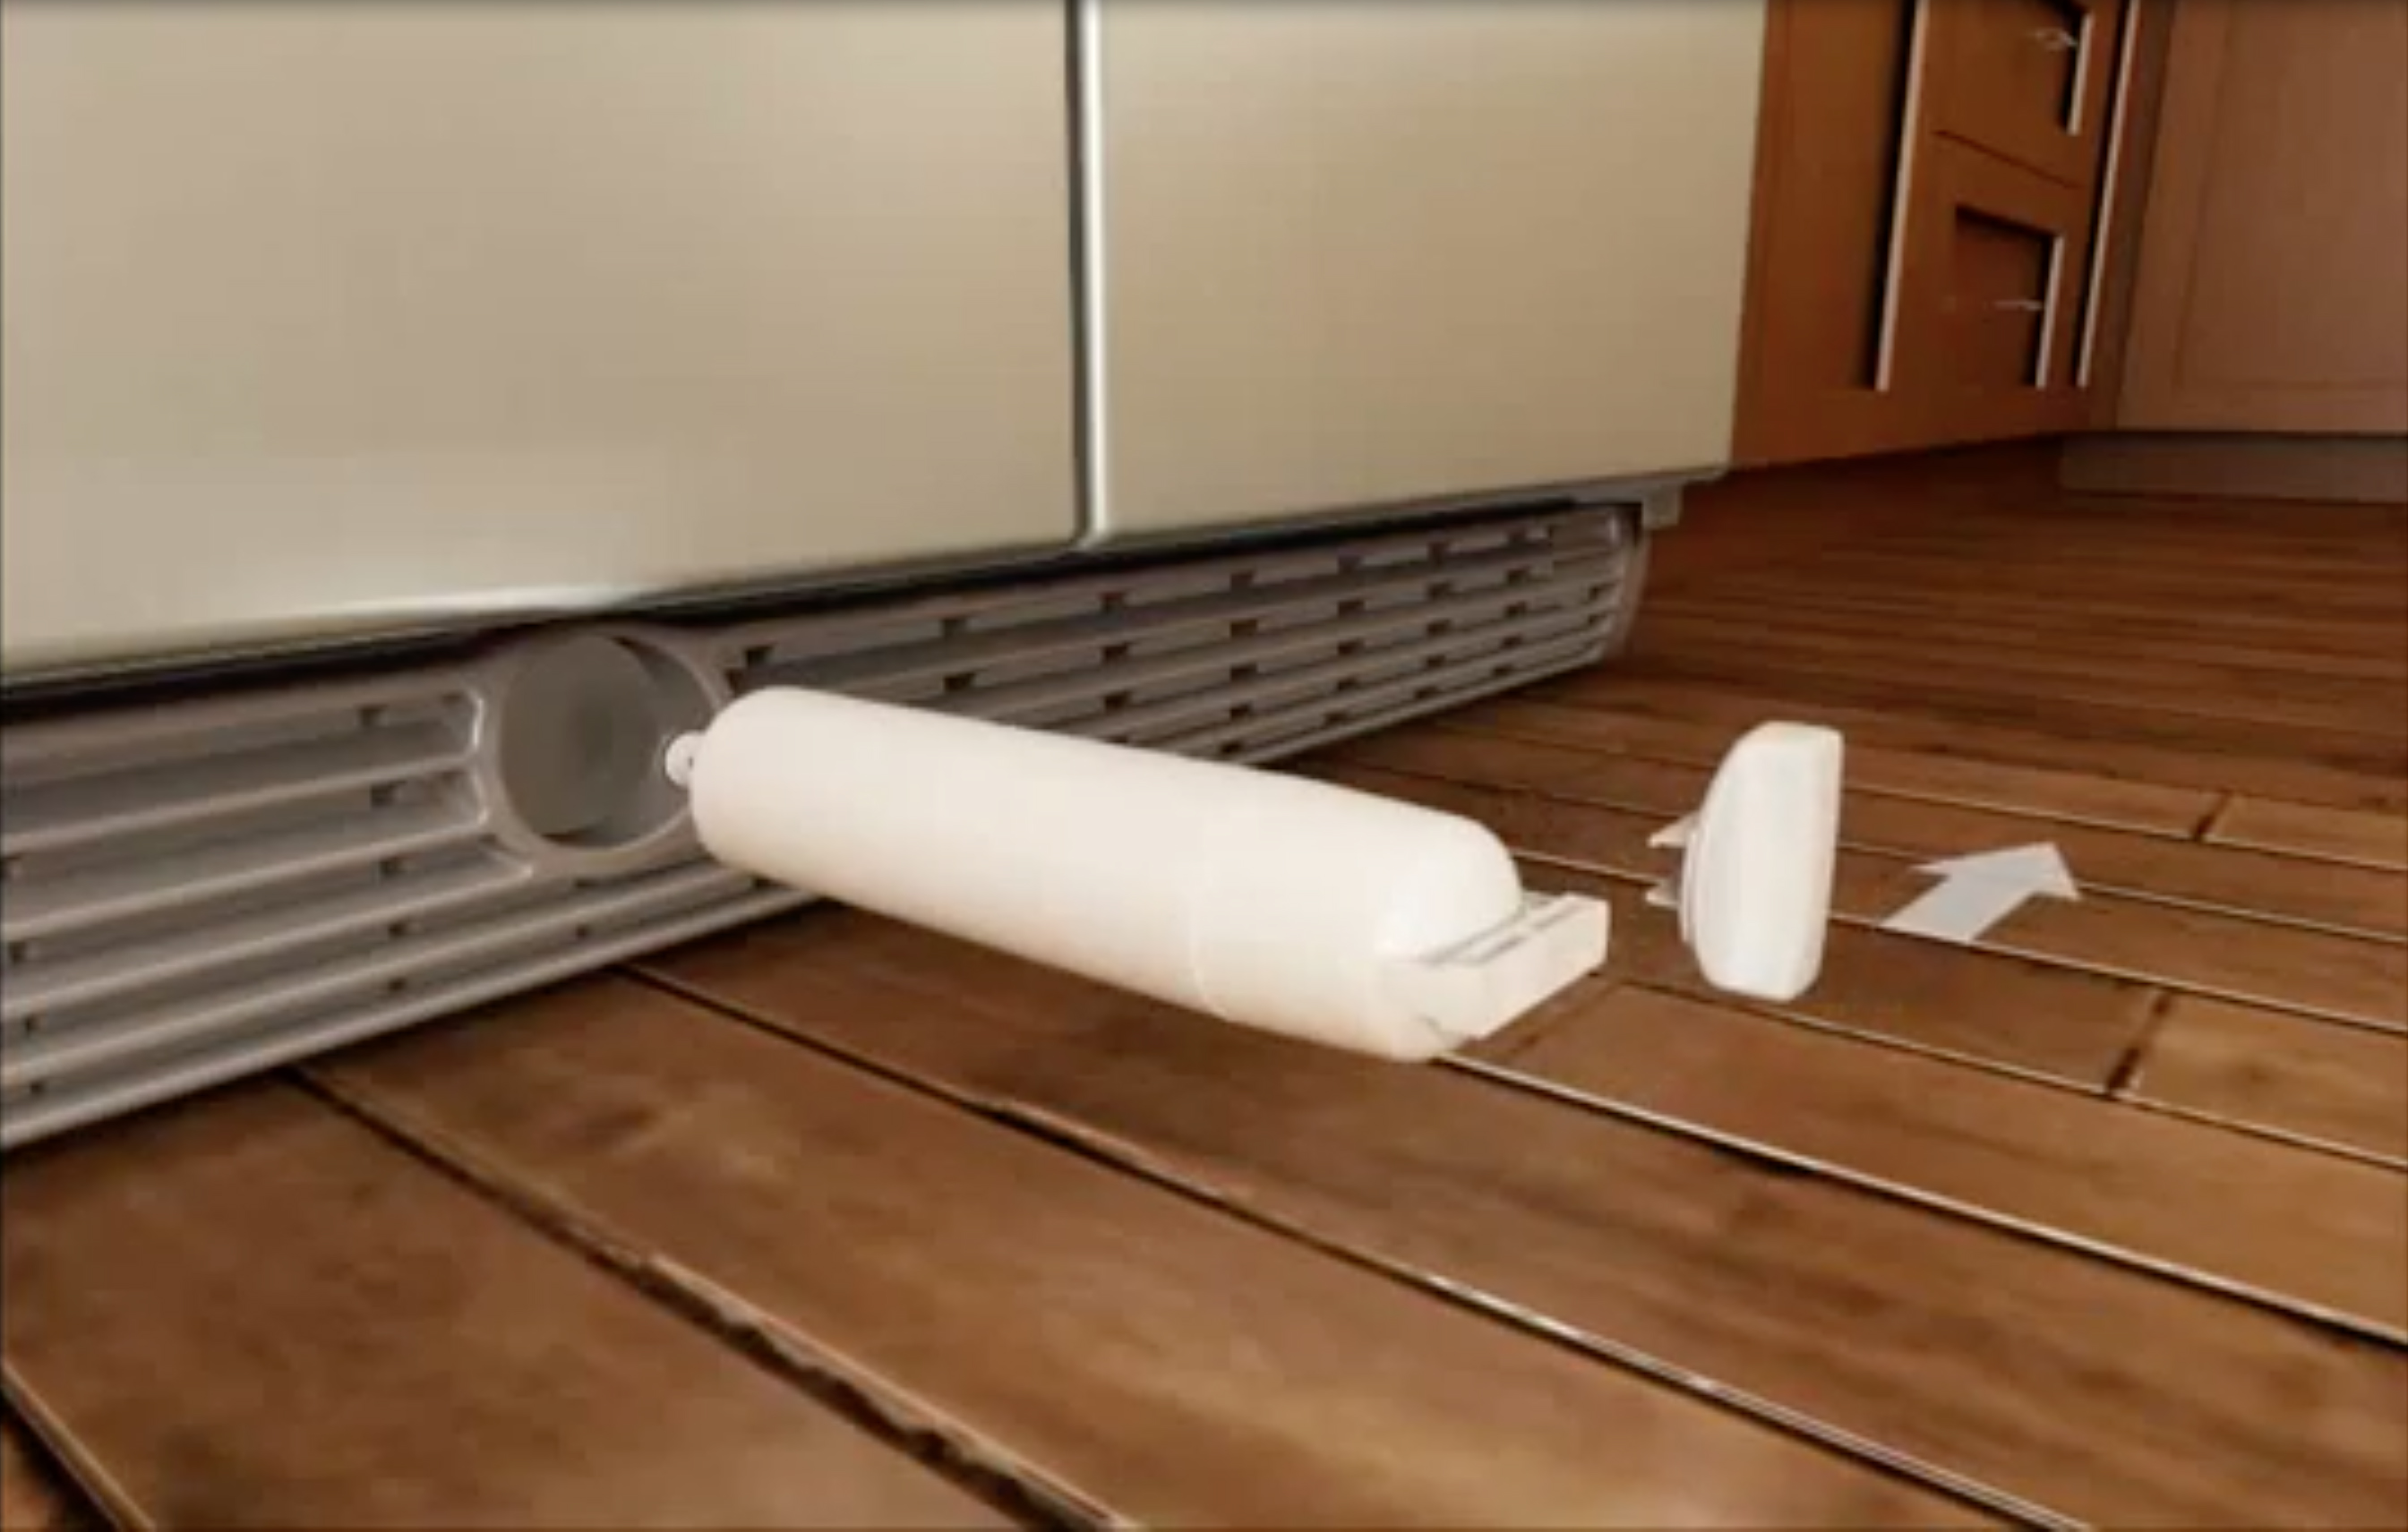 How To Get Rid Of Refrigerator Puddles Refrigerator Tips And Tricks